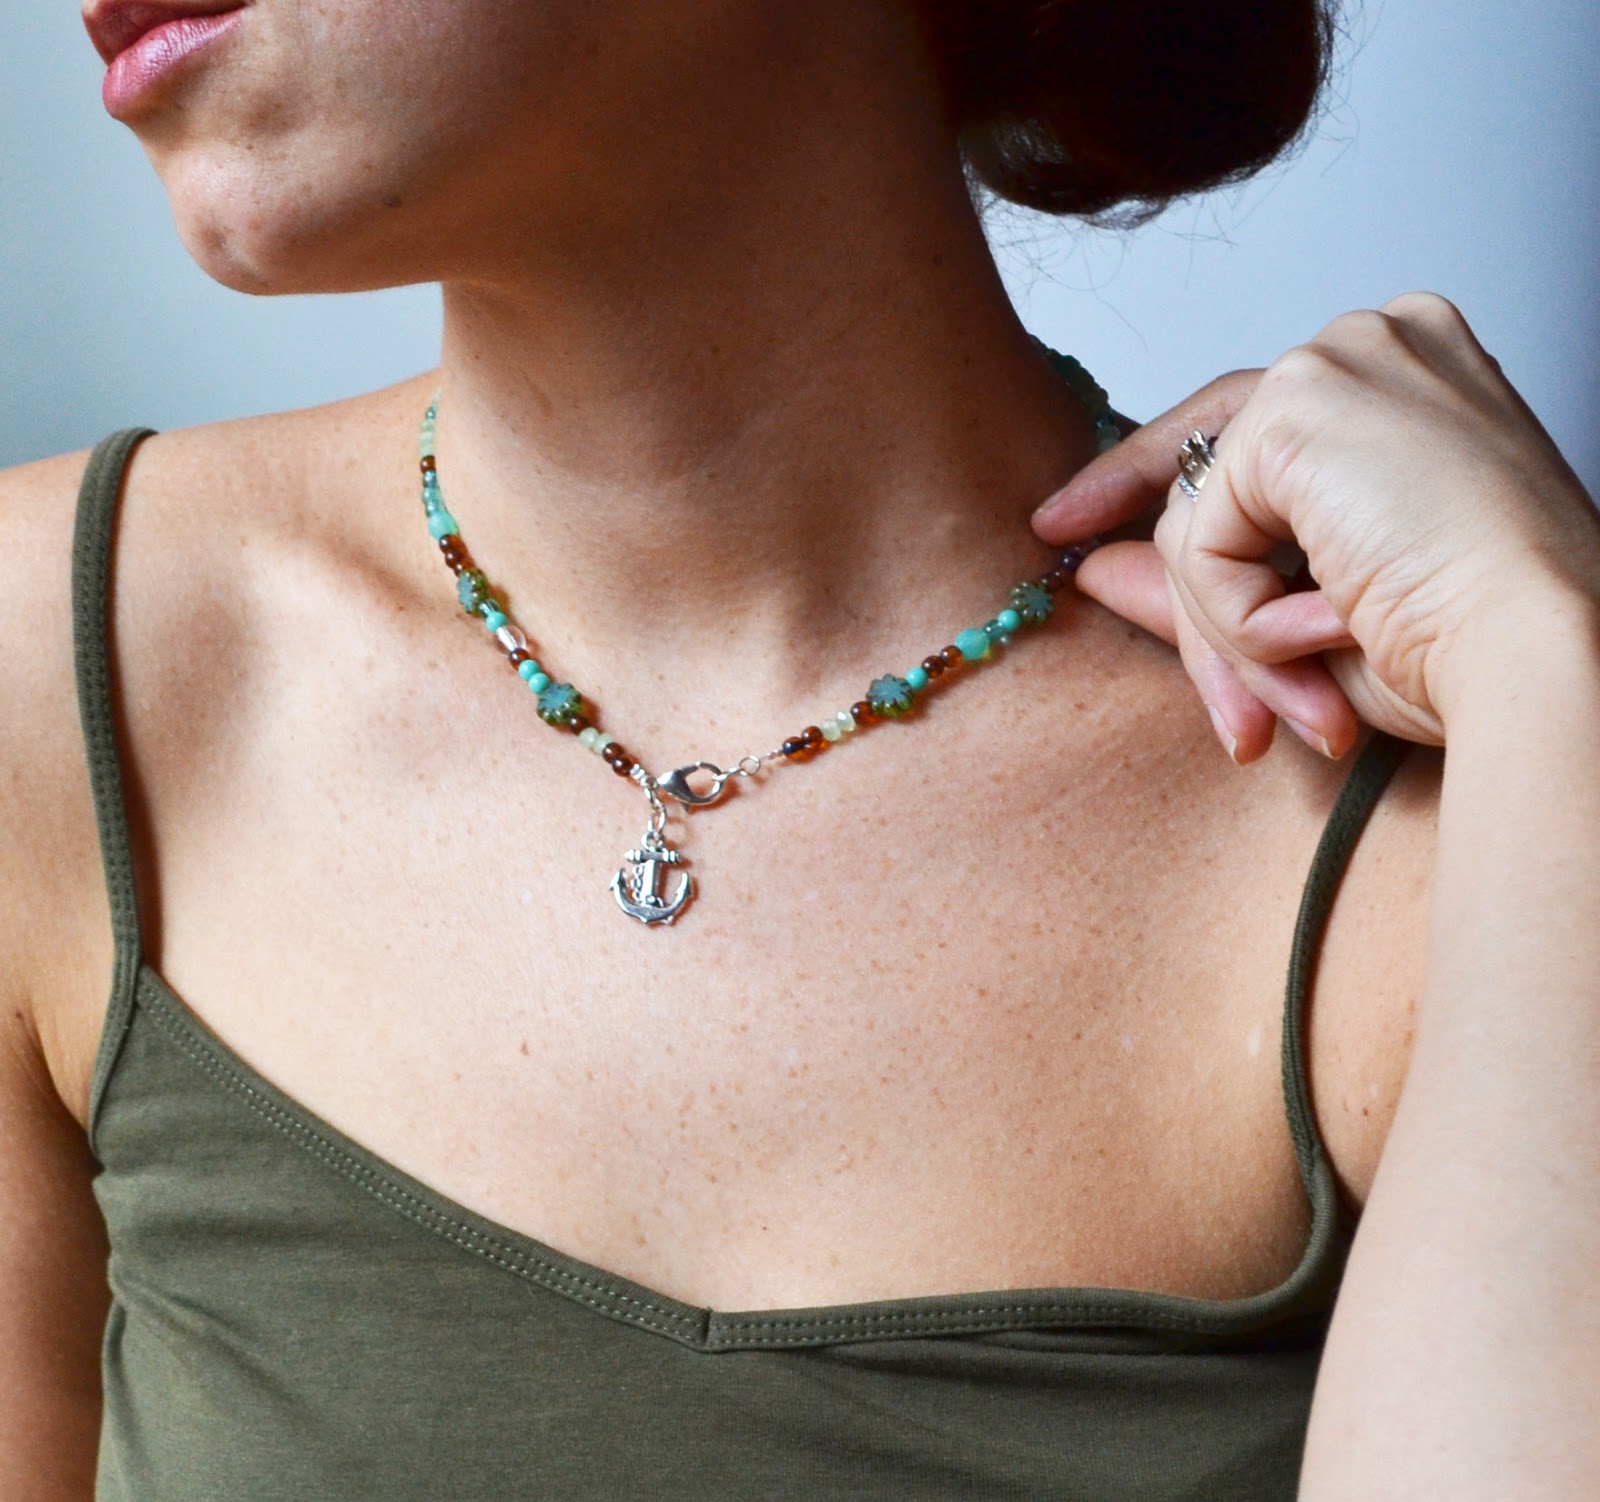 http://www.storenvy.com/products/5932648-anchor-necklace-ocean-jewelry-beach-necklace-summer-jewelry